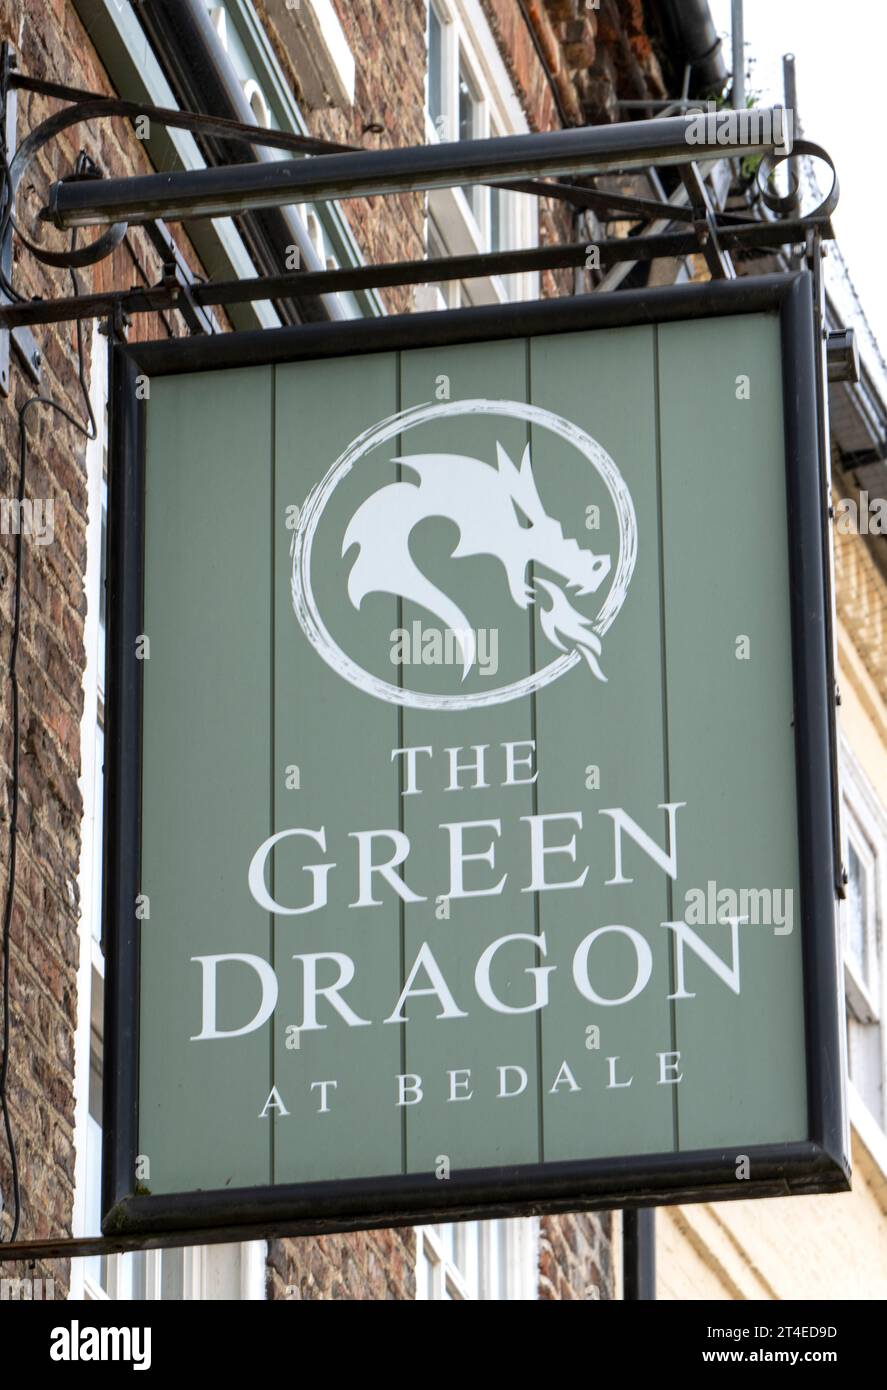 Traditional hanging pub sign at The Green Dragon public house, Market Place, Bedale, North Yorkshire, England, UK. Stock Photo